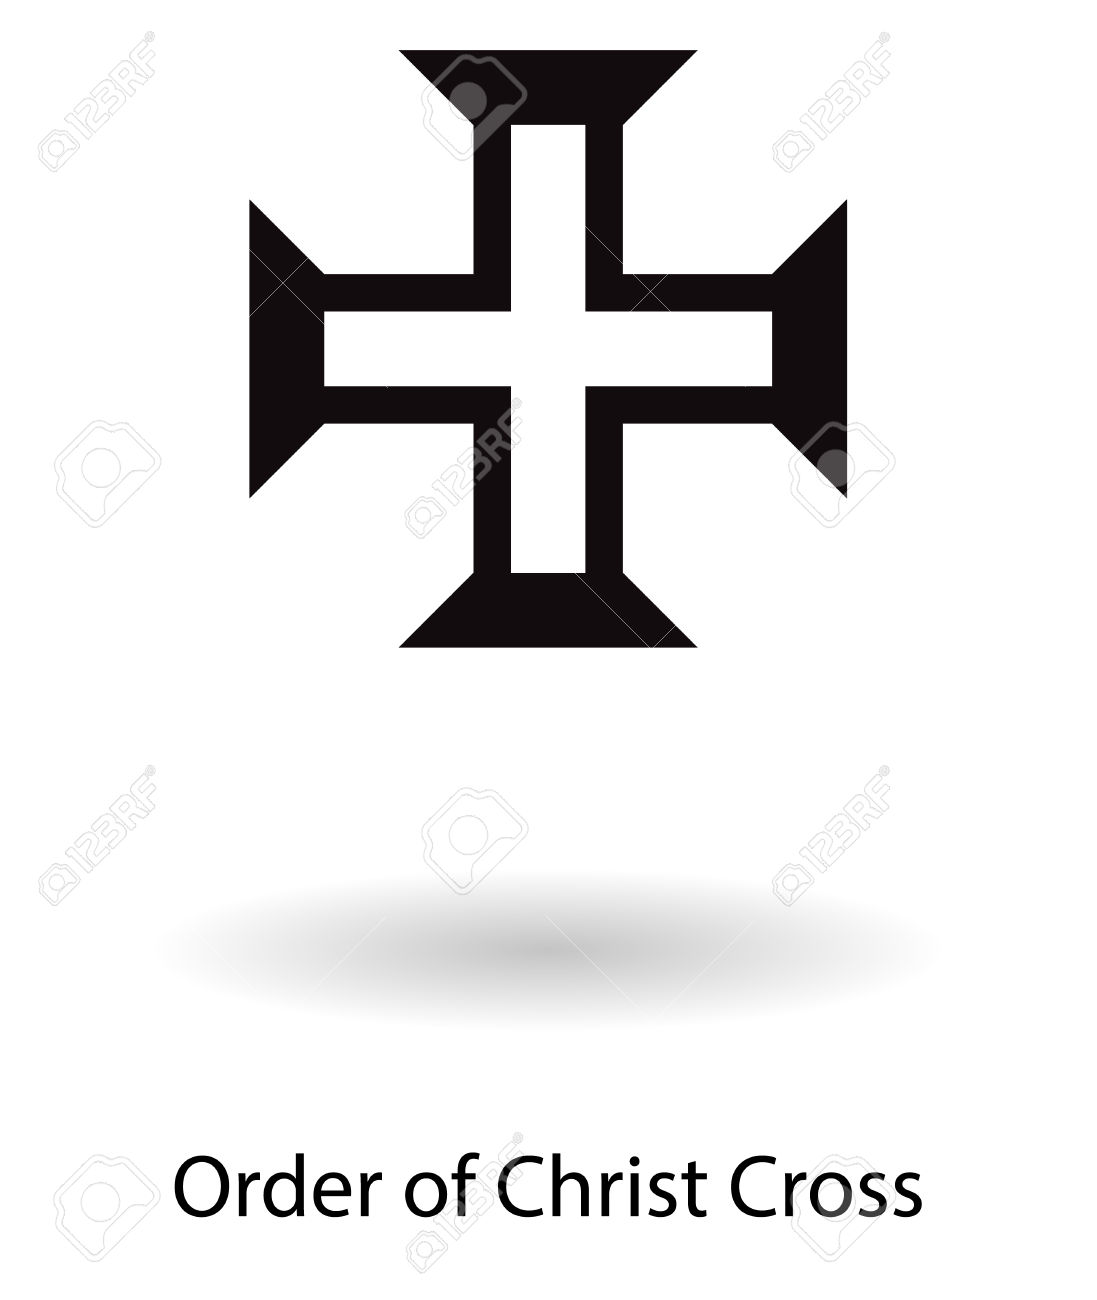 Images of Order Of Christ | 1097x1300